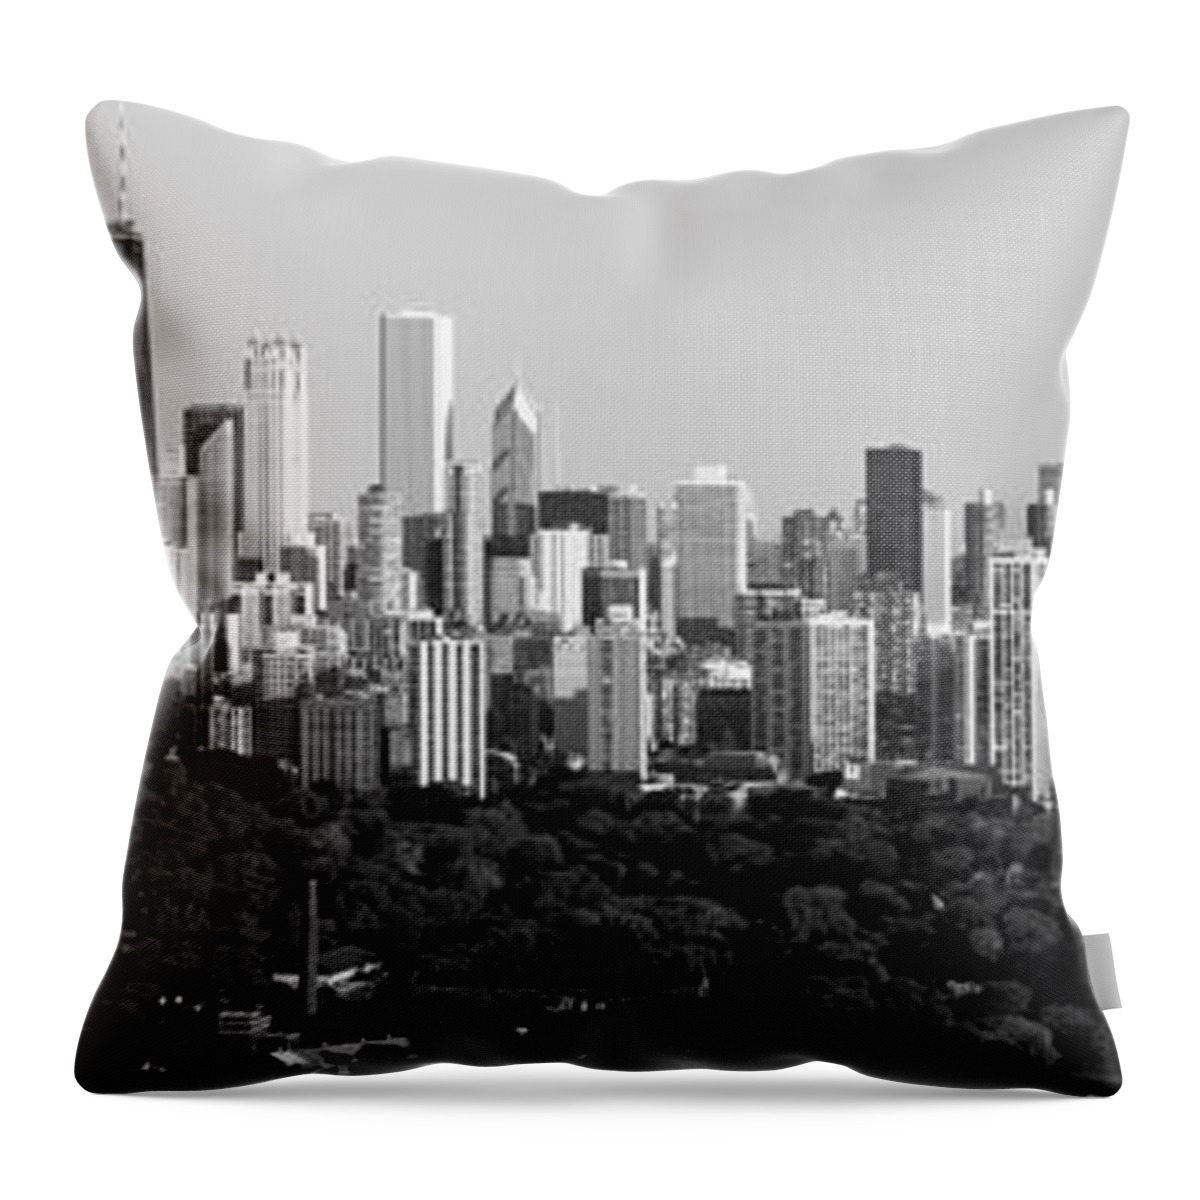 Photography Throw Pillow featuring the photograph Buildings In A City, View Of Hancock by Panoramic Images